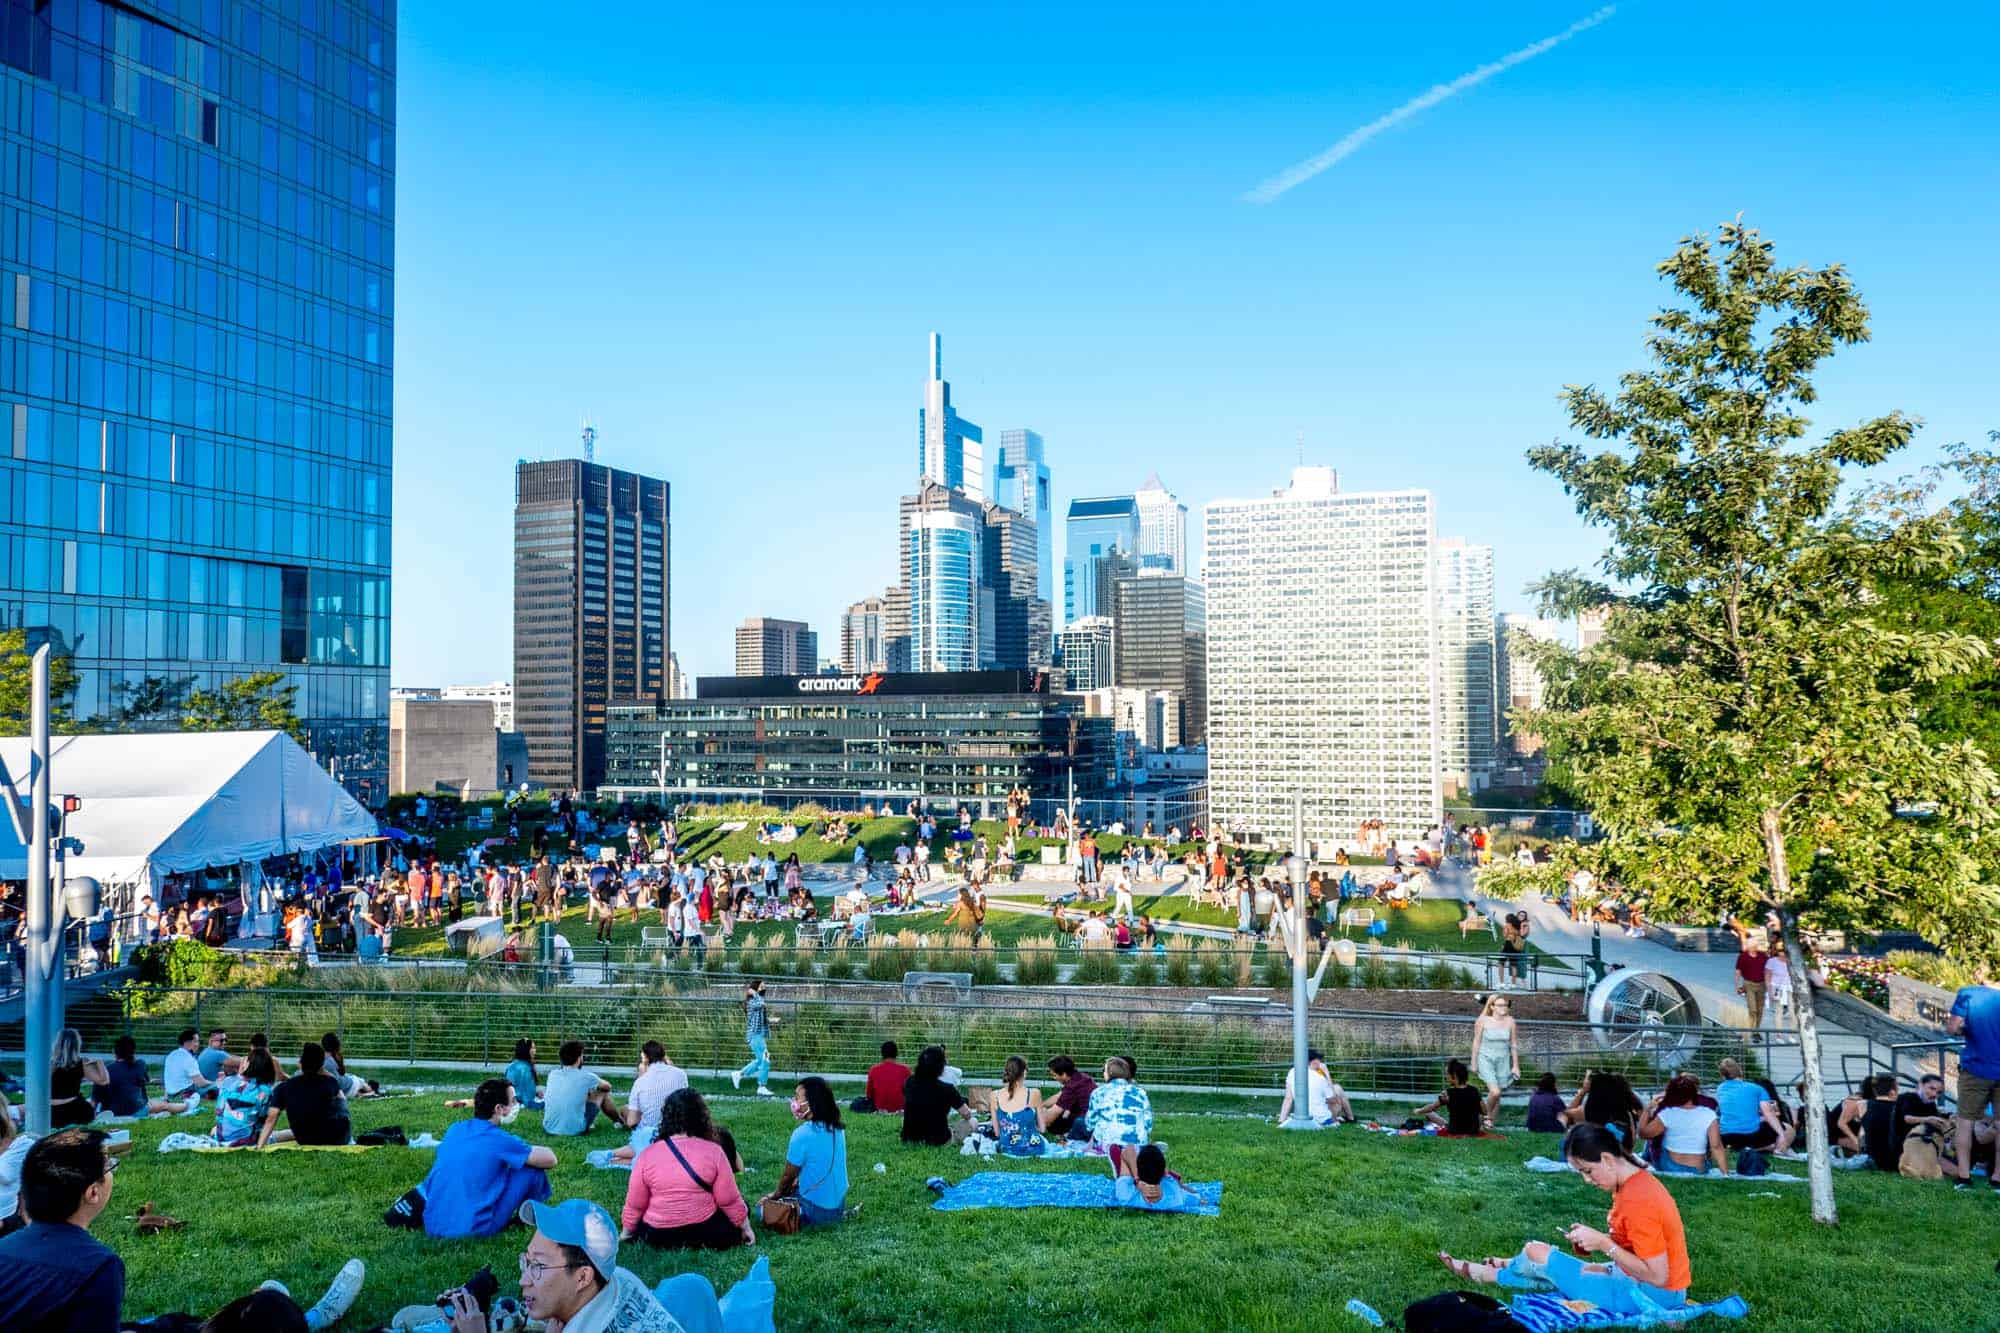 People sitting on the lawn at a rooftop park with a view of skyscrapers in the distance.